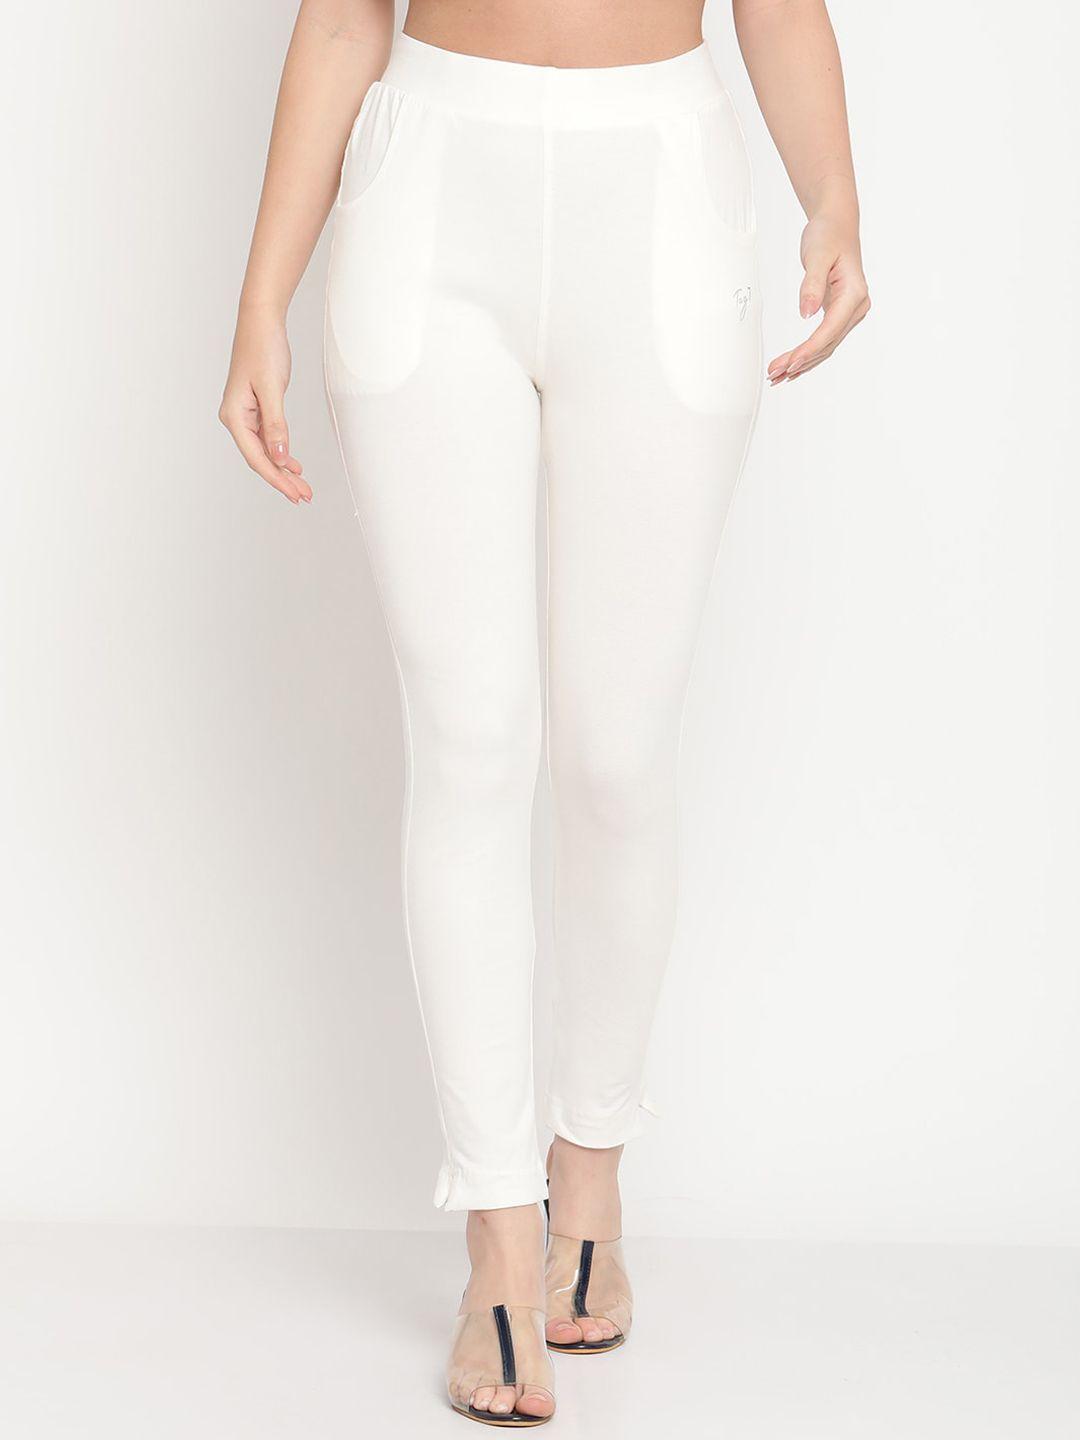 tag 7 women off-white solid ankle-length leggings